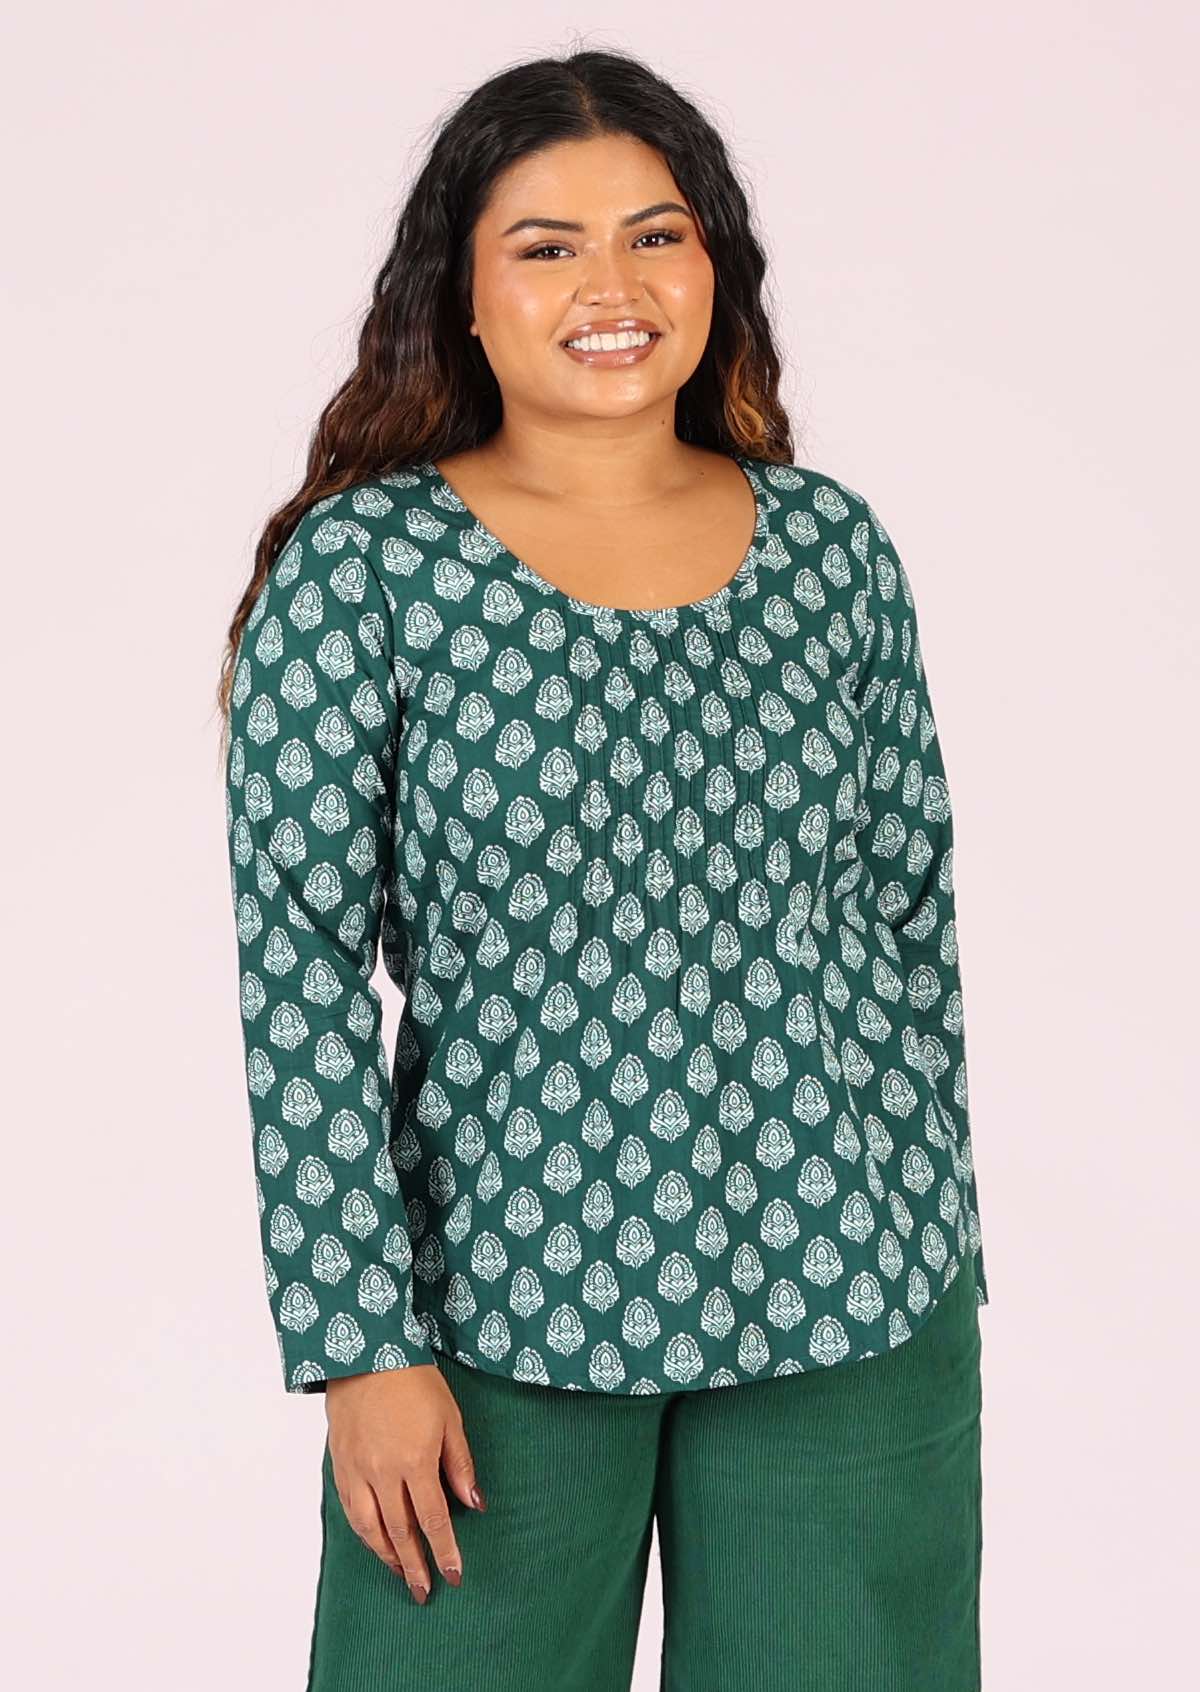 100% cotton long sleeve top with flattering round neckline and tiny pleat detail across bodice